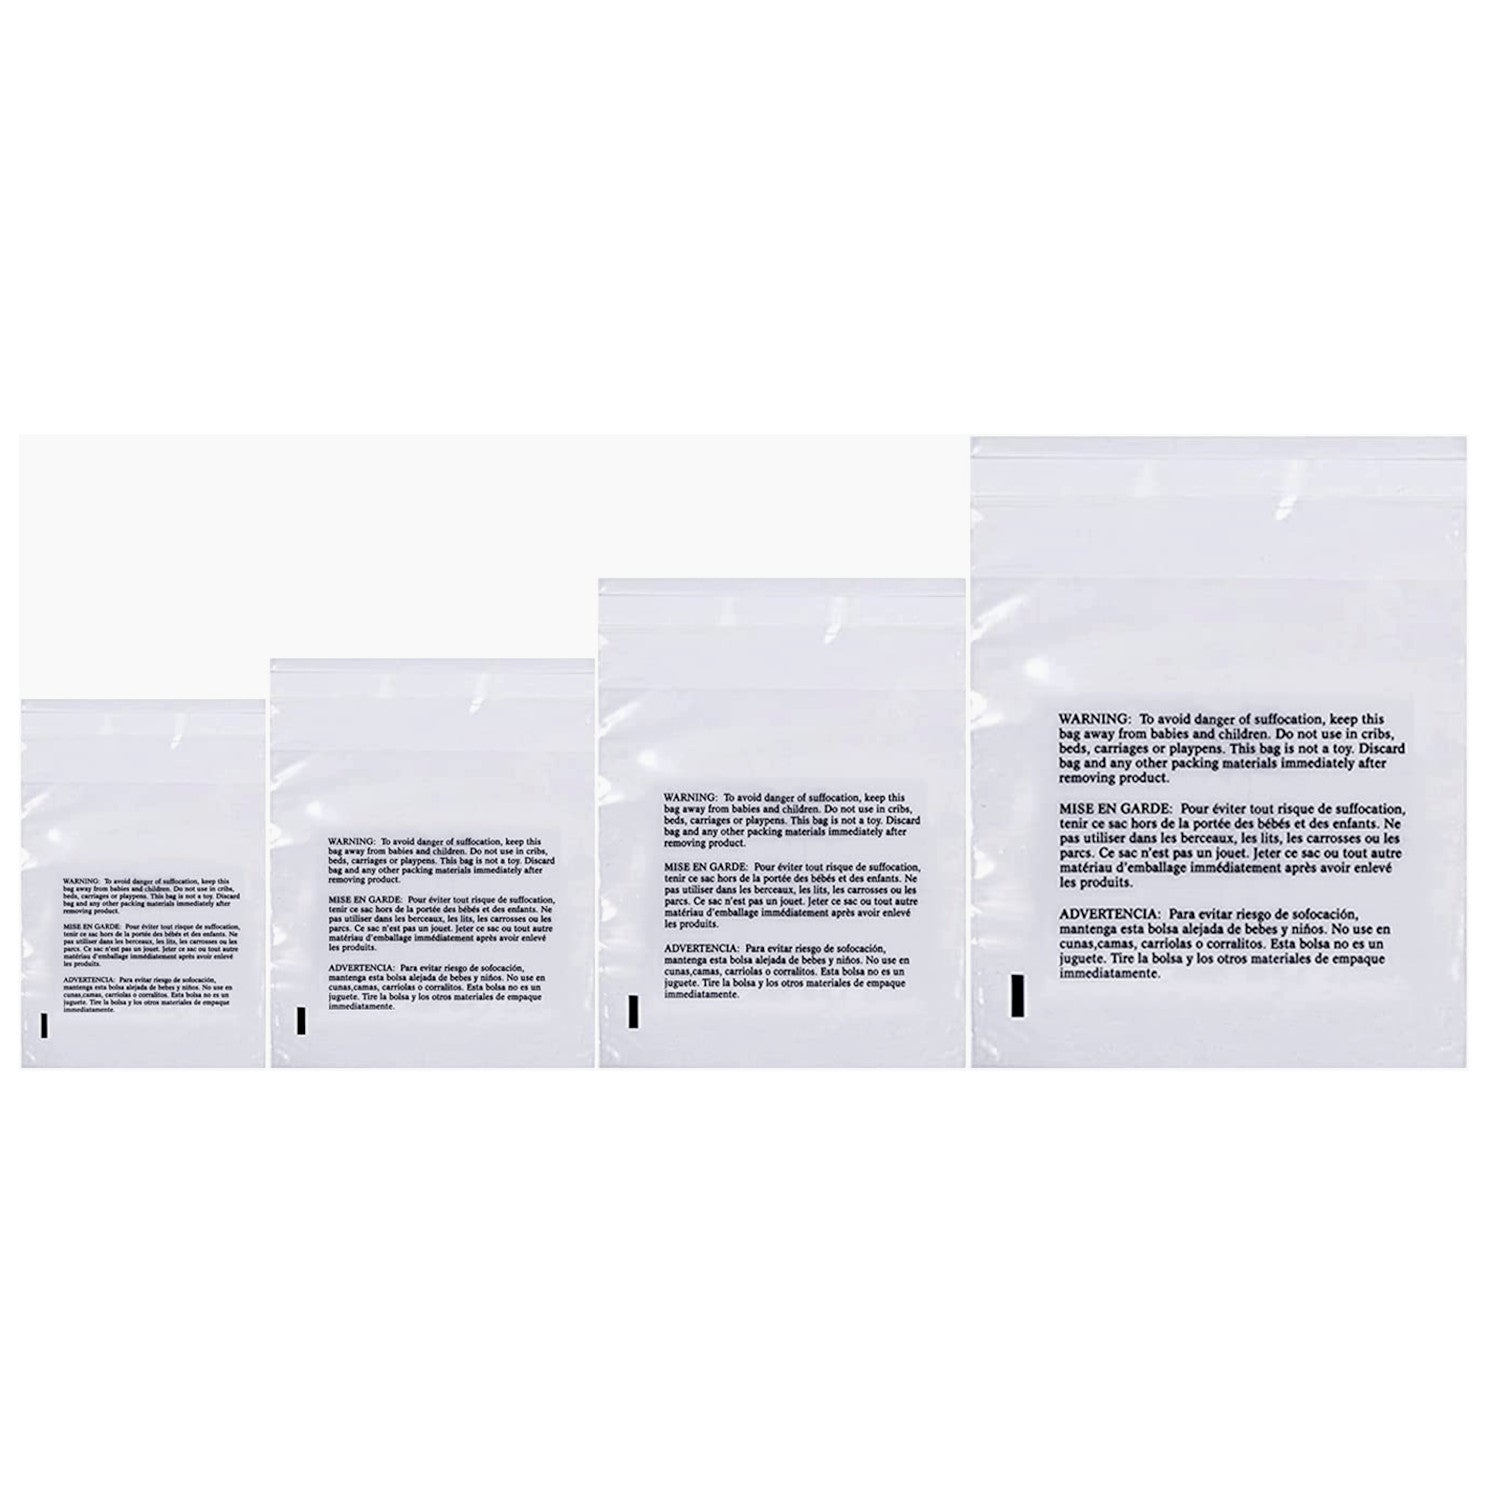 4 clear bags with suffocation warnings